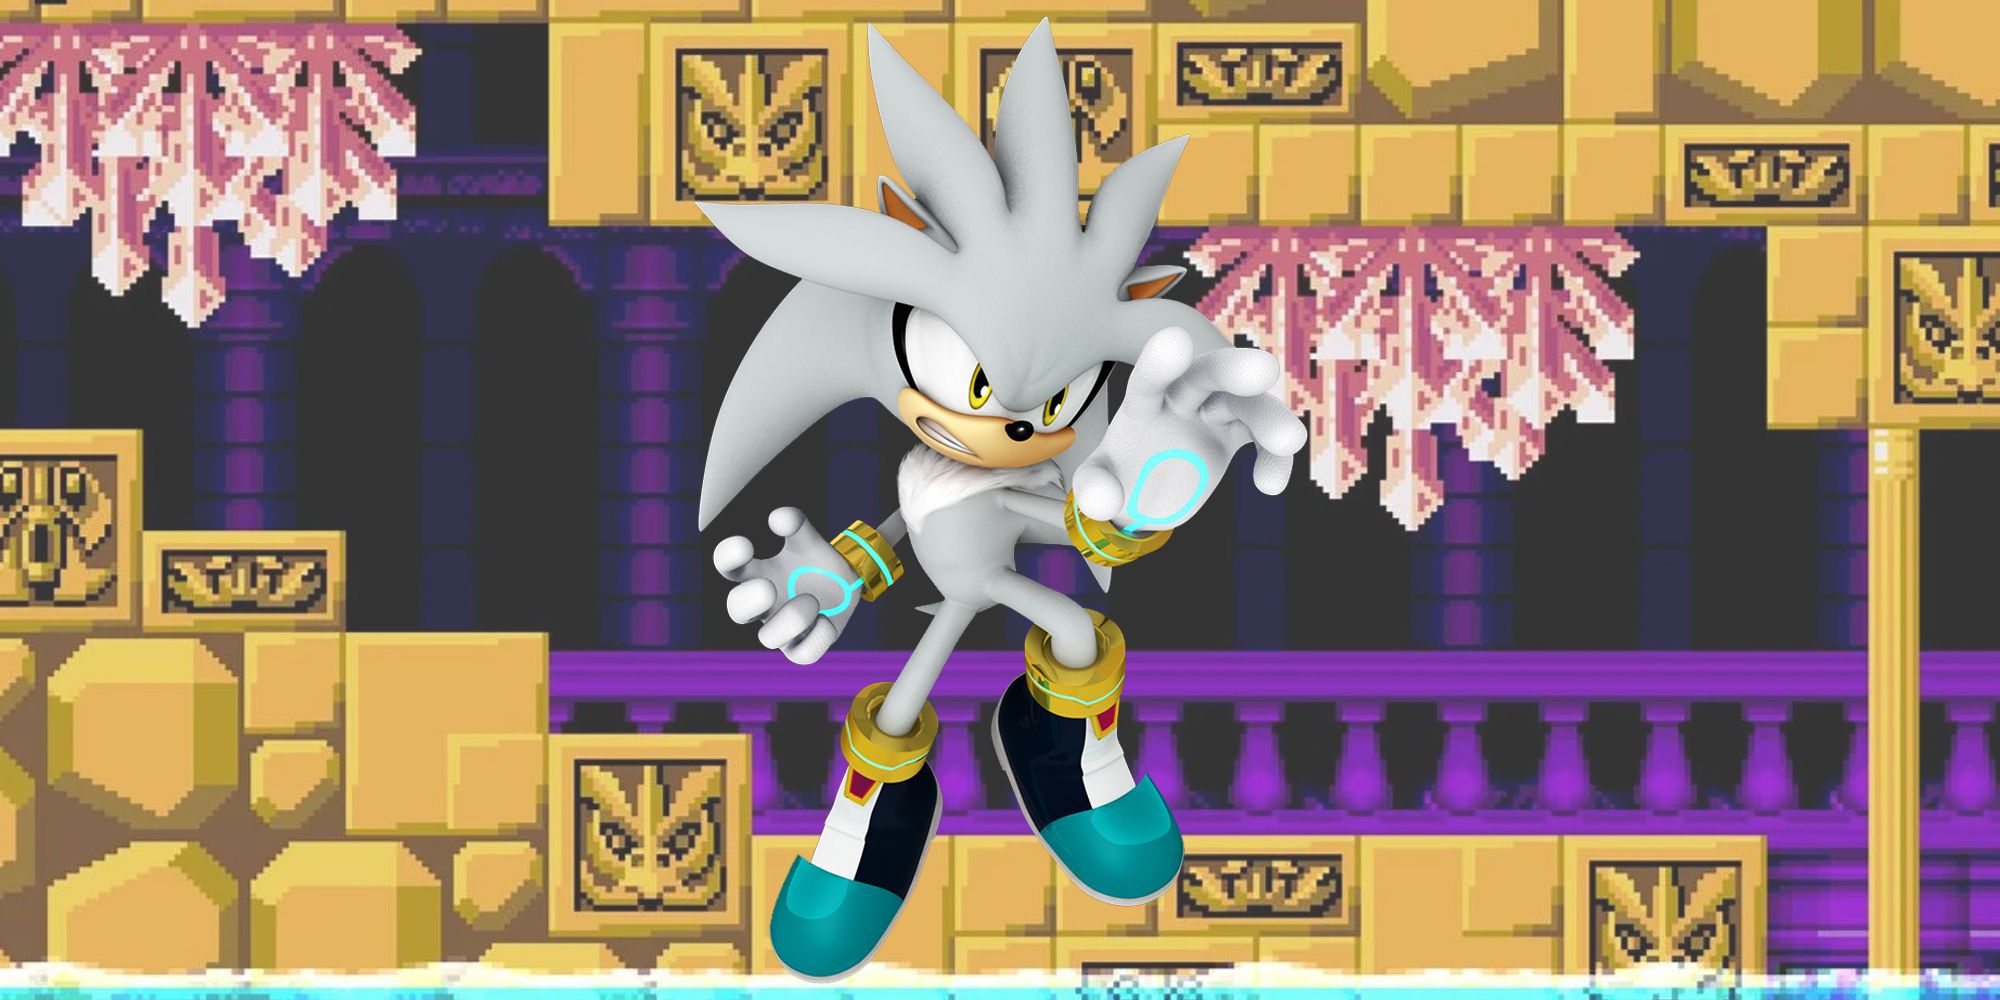 Silver the Hedgehog in Labryinth Zone.